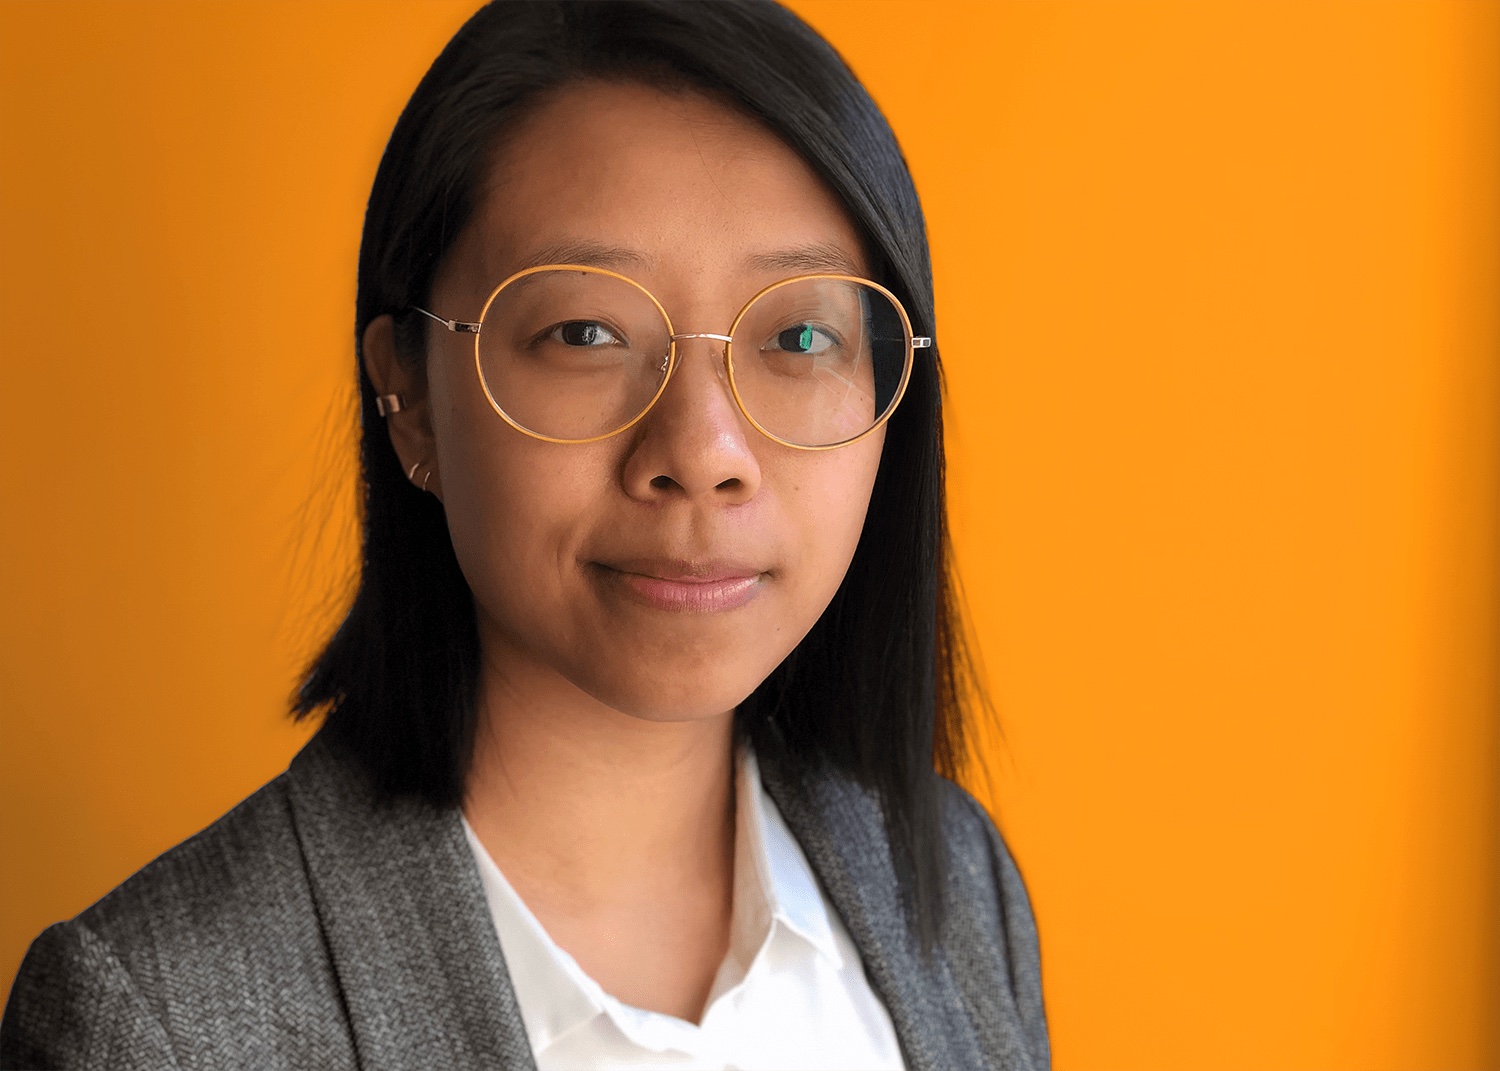 “A bigger focus on the human impact of technology”: Sisi Wei is The Markup’s new editor-in-chief